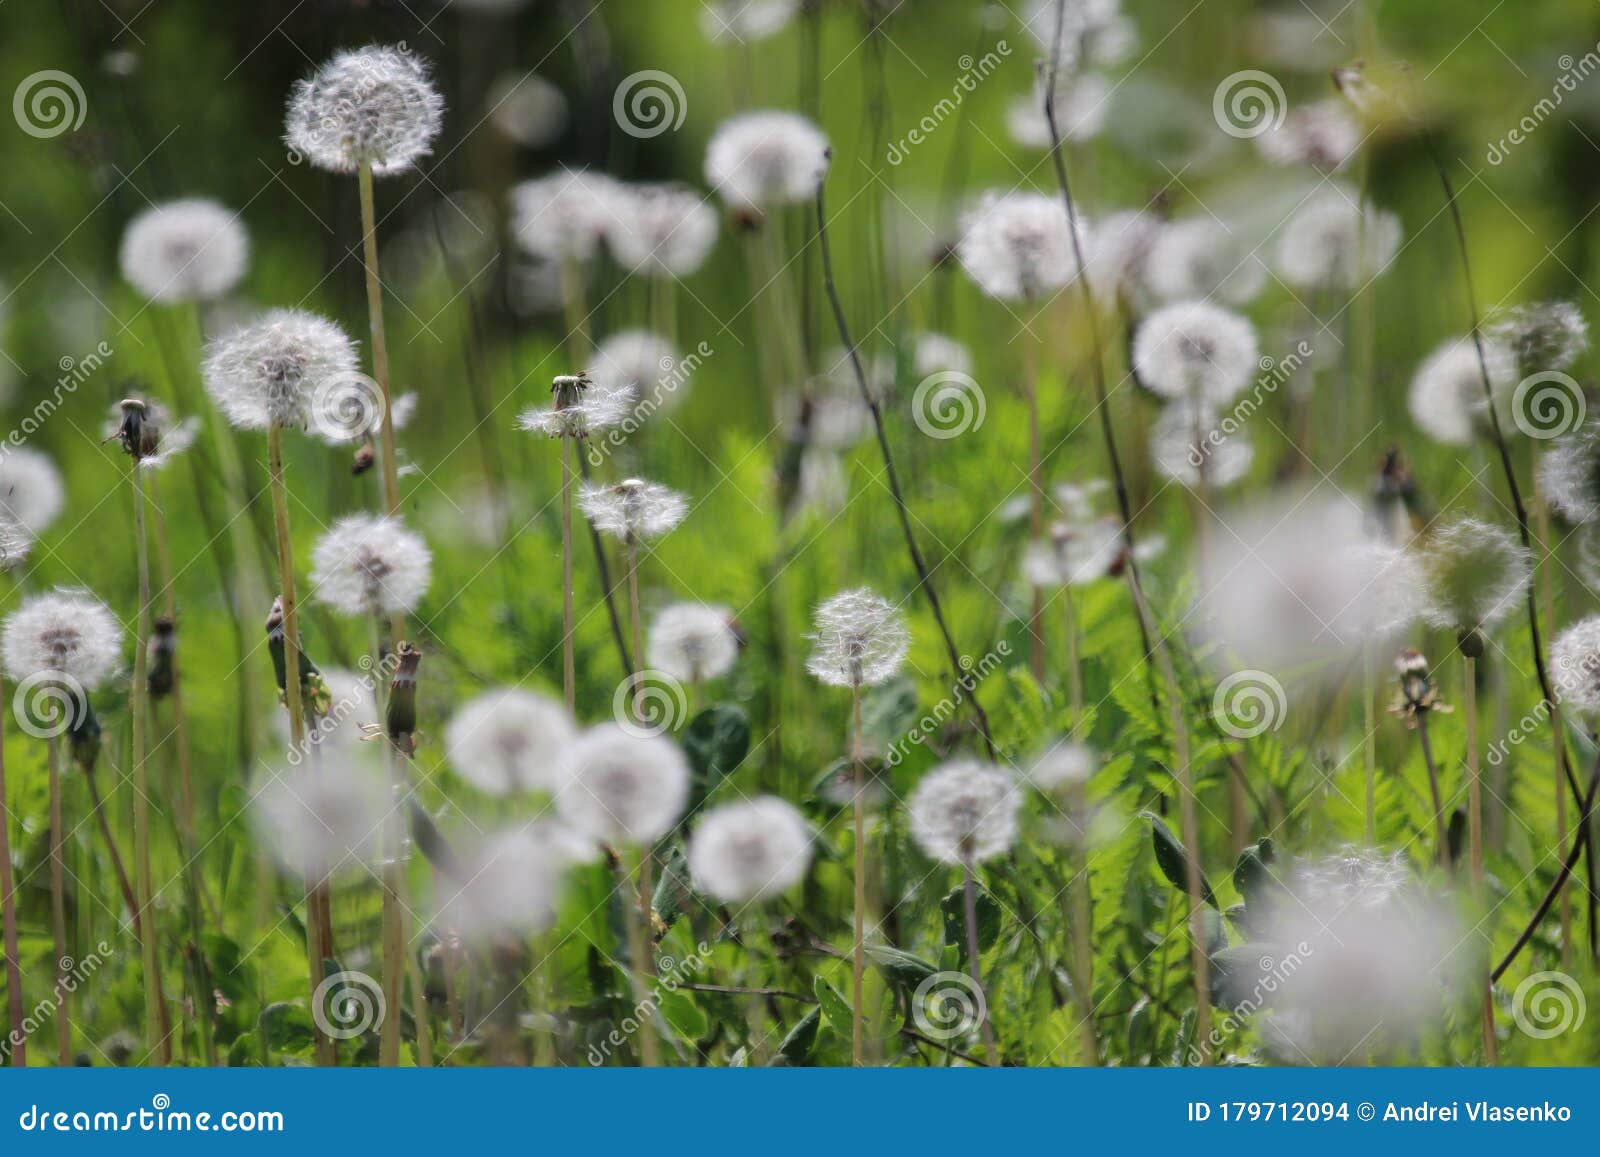 fruiting white fluffy dandelion plants taraxum officinale from sunflower family asteraceae or compositae on a greenish-brown